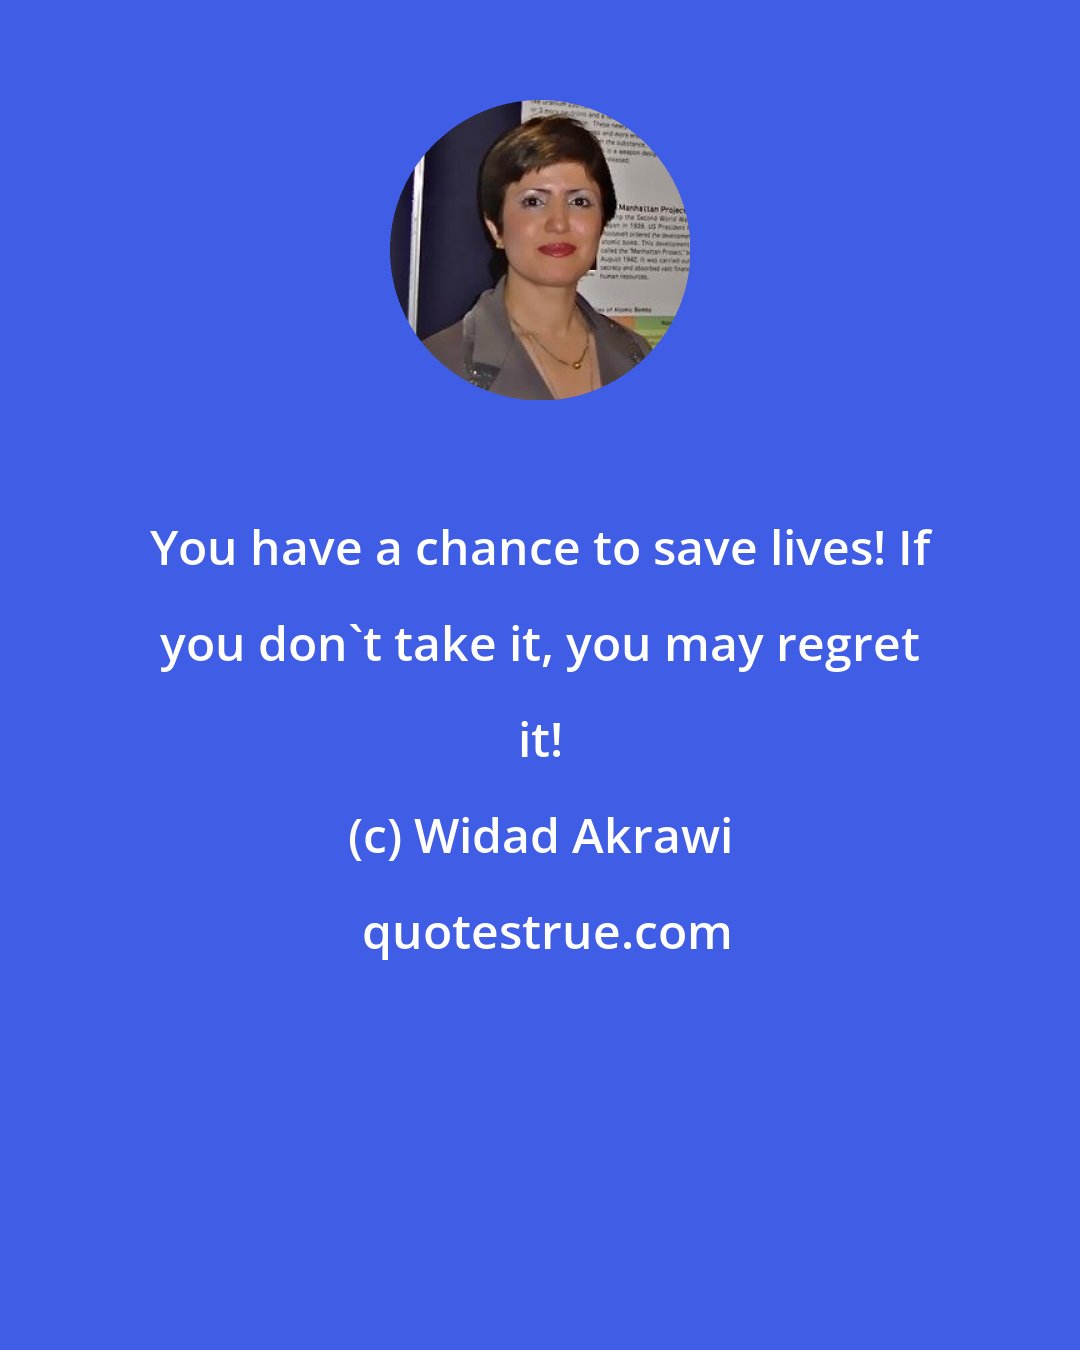 Widad Akrawi: You have a chance to save lives! If you don't take it, you may regret it!